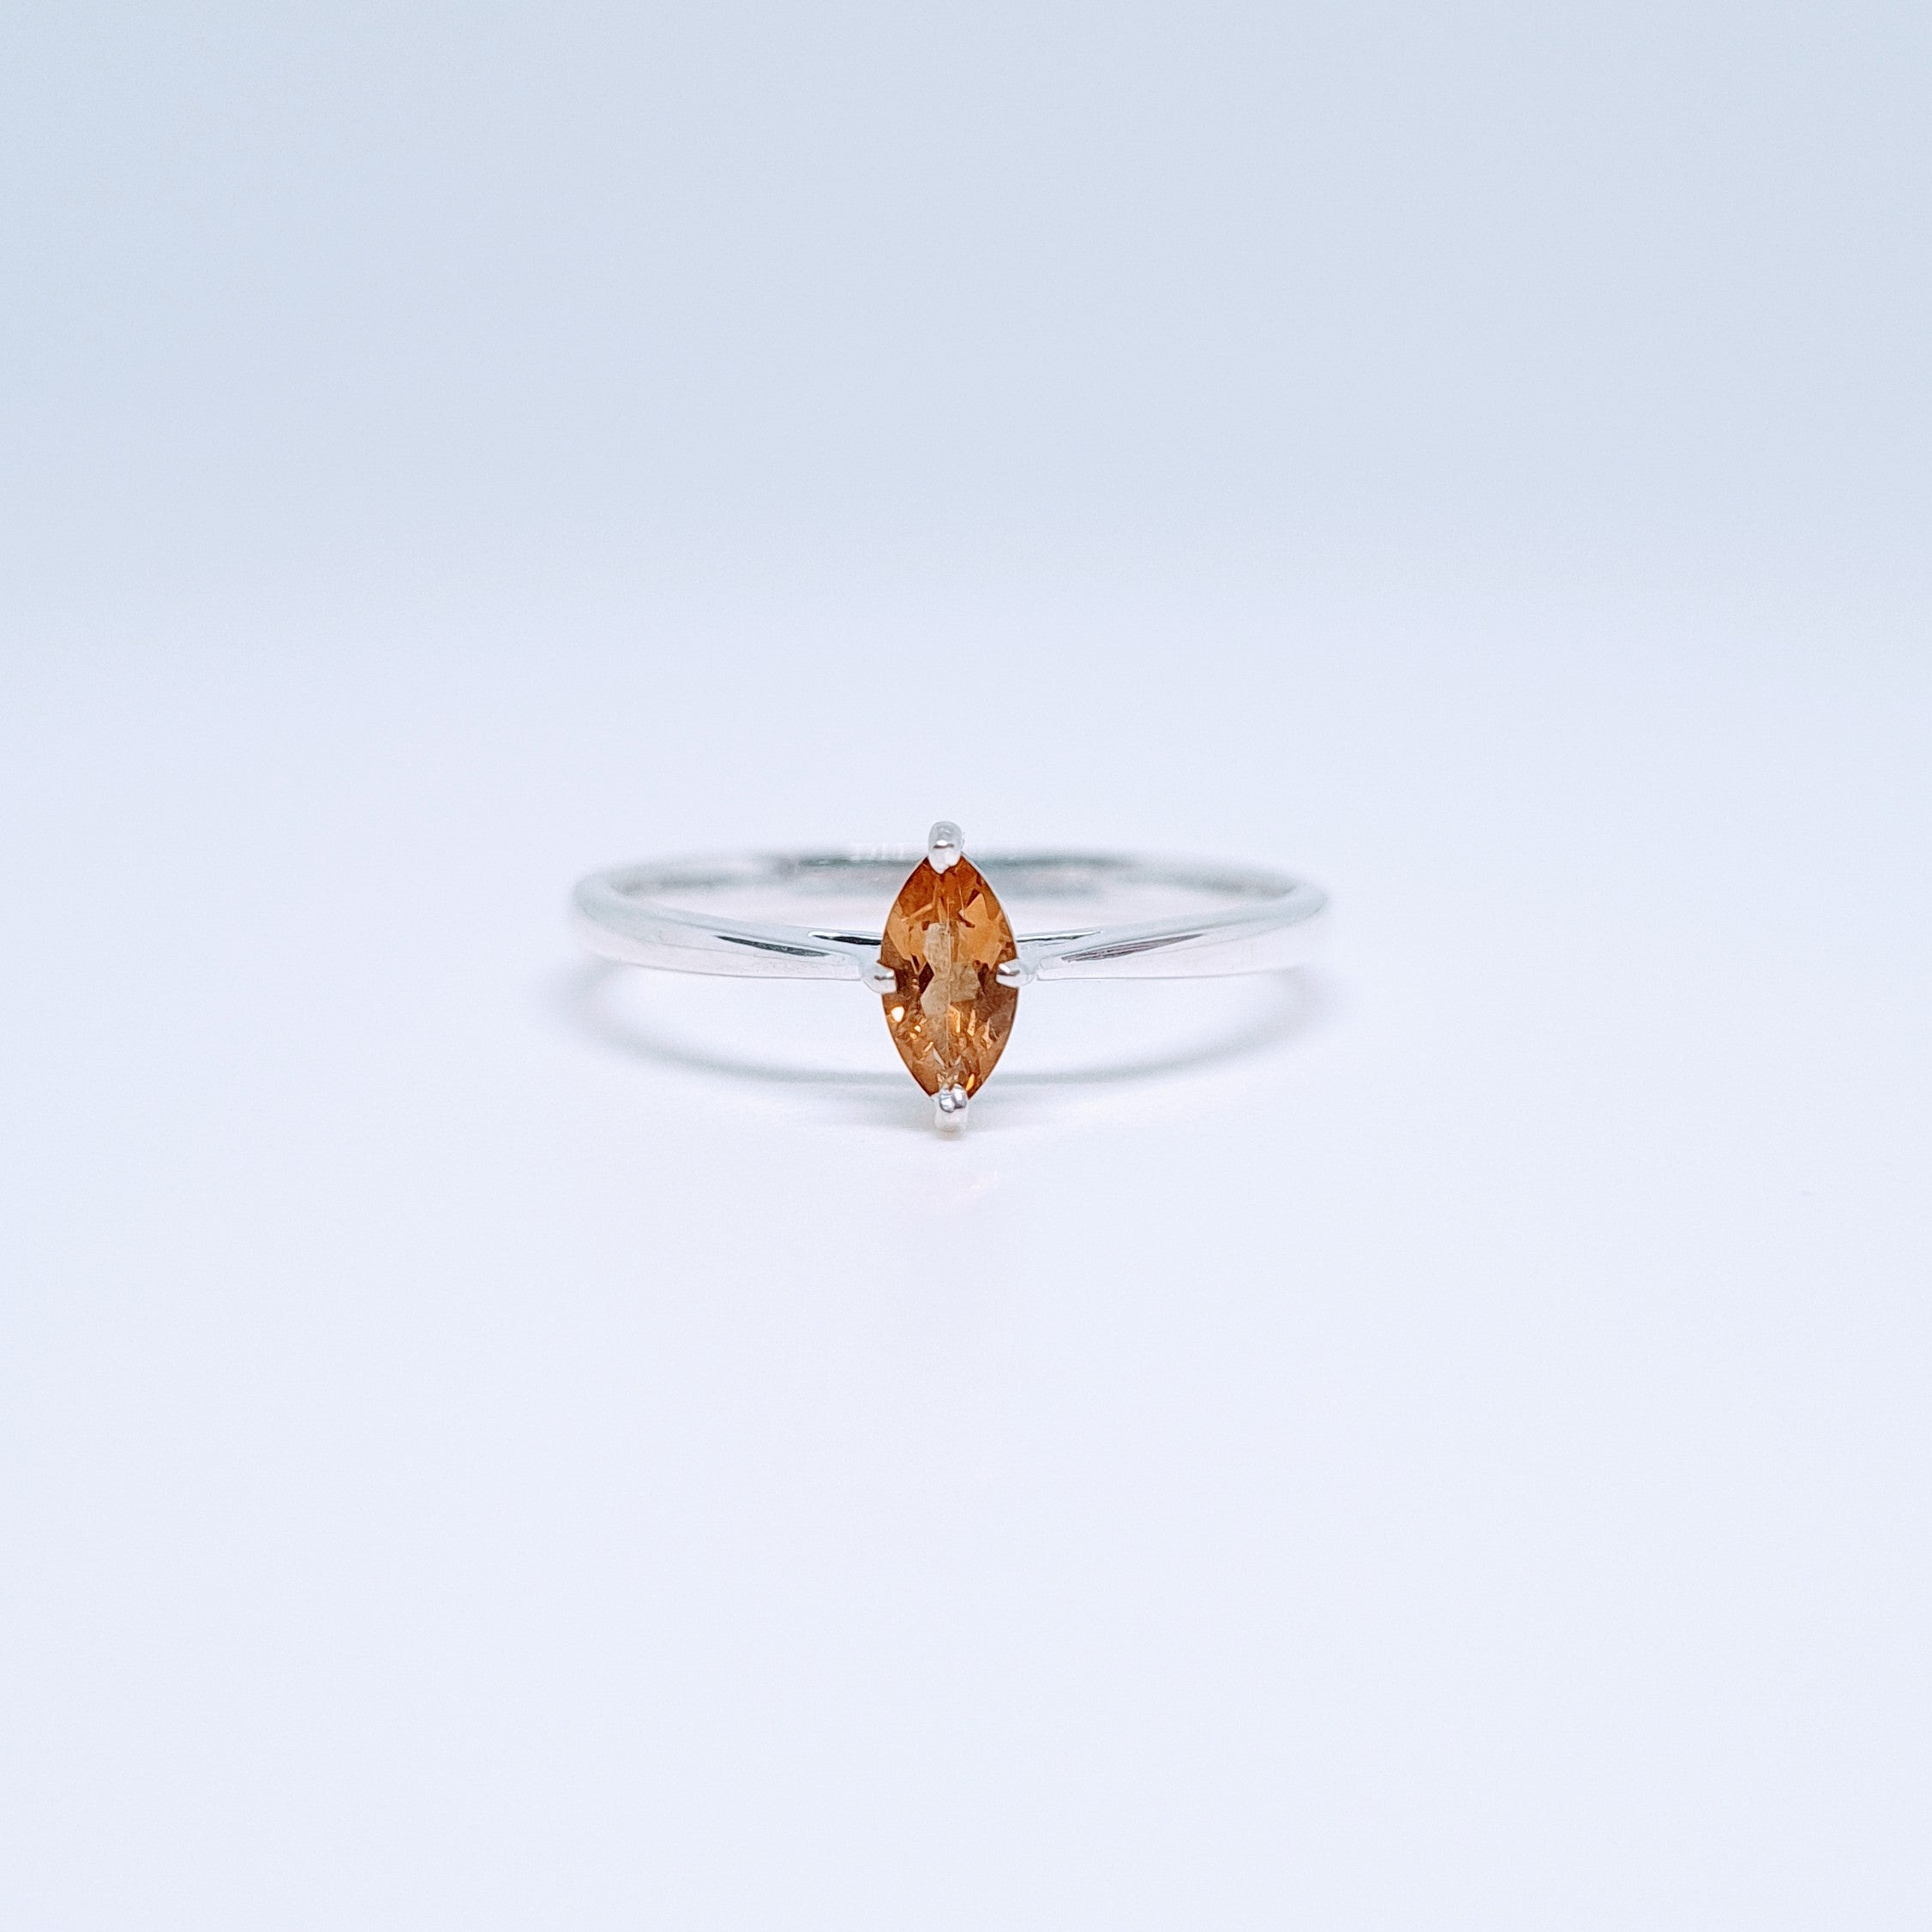 Citrine gemstone ring in marquis setting